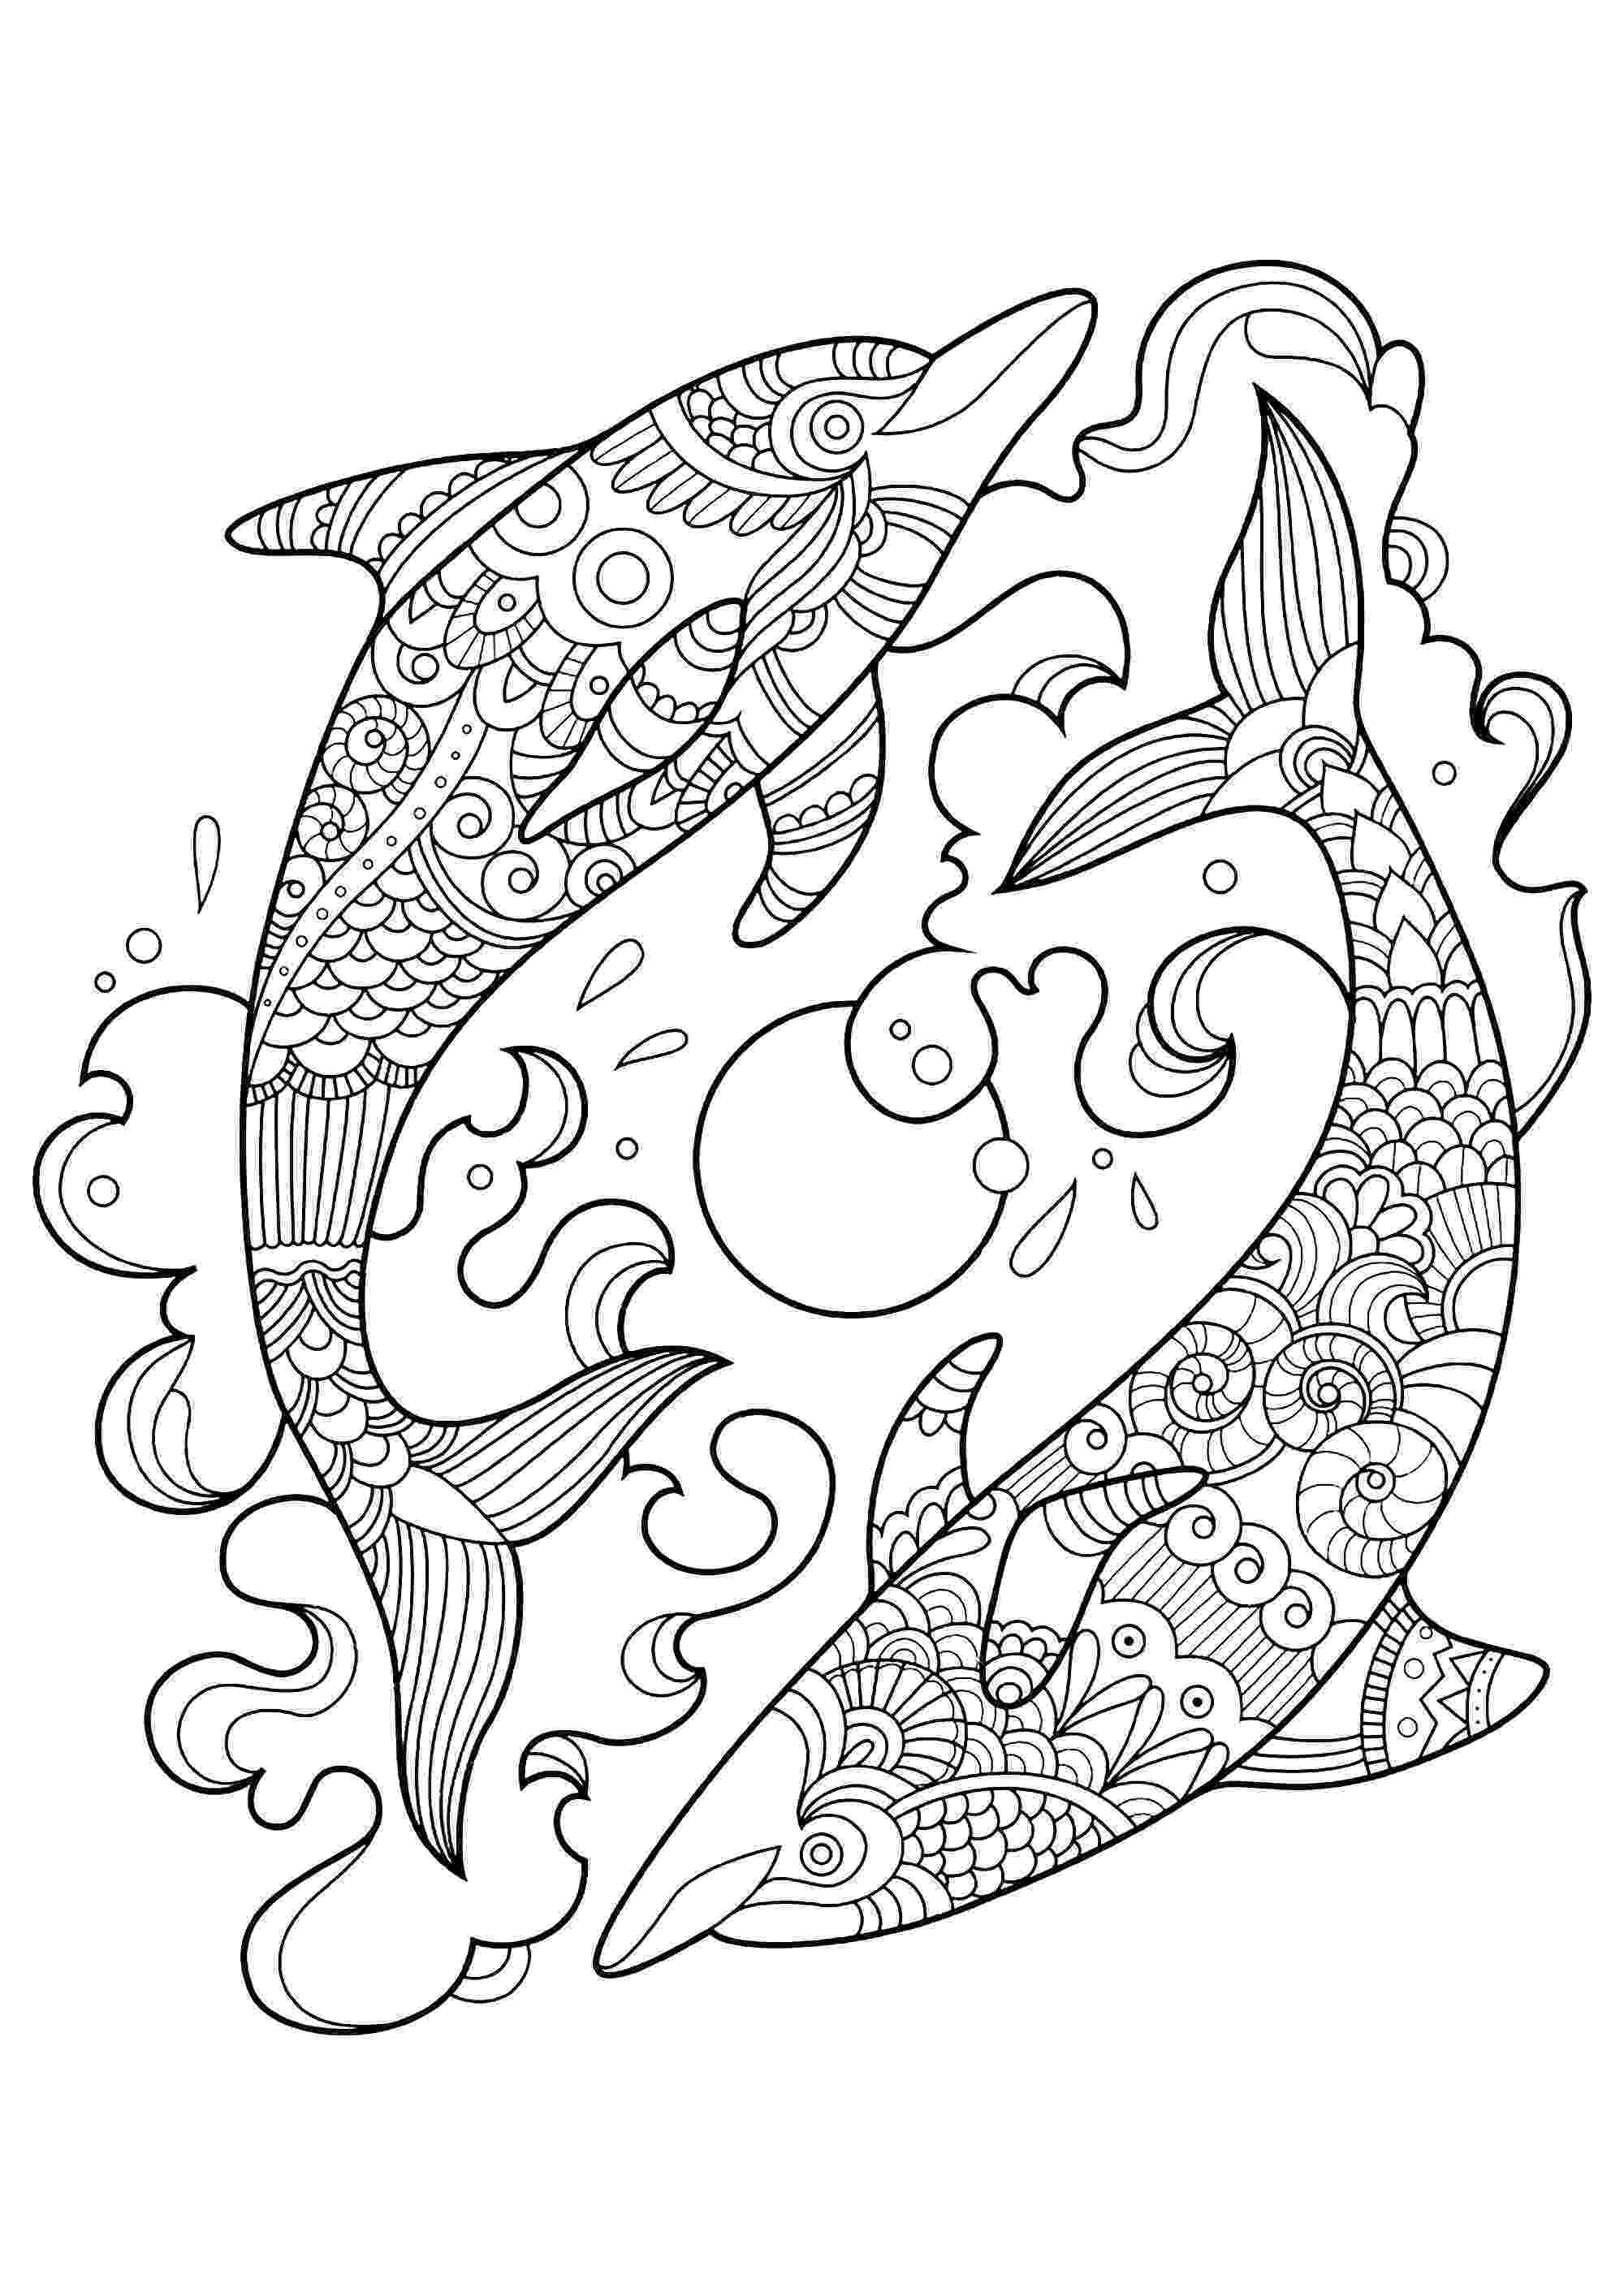 free printable dolphin coloring pages free printable dolphin pictures download free clip art pages free coloring printable dolphin 